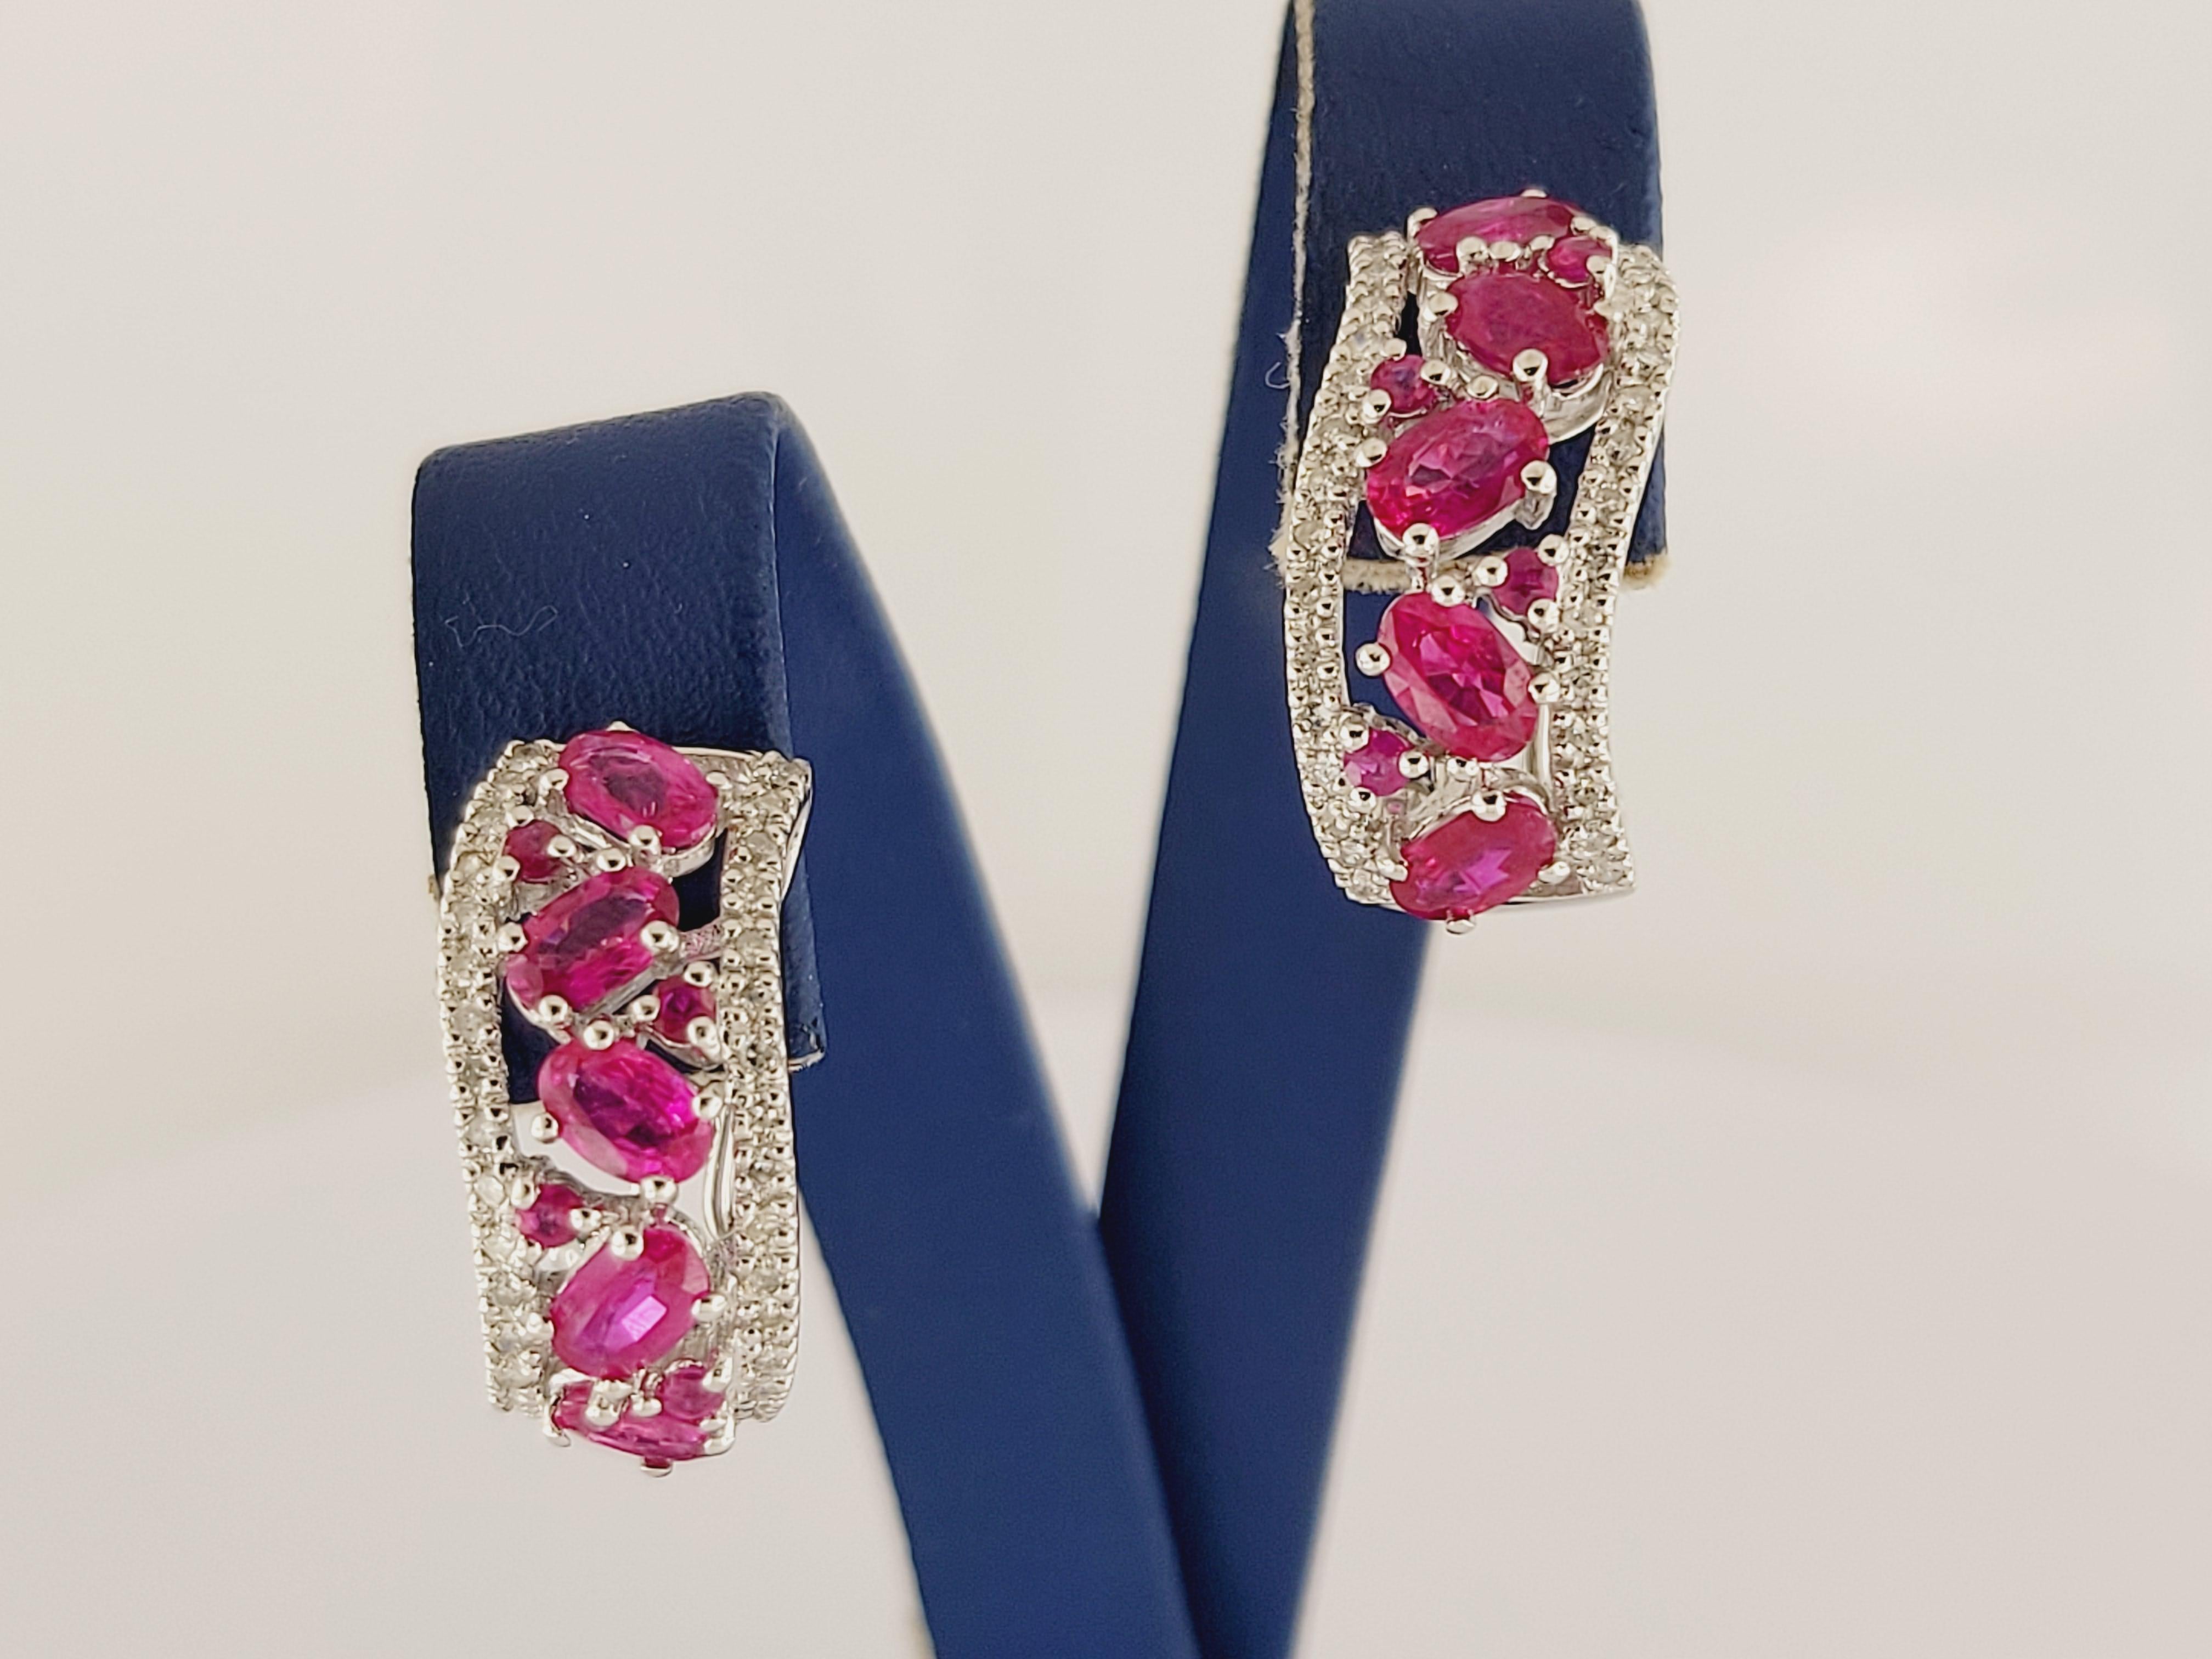 Hand-Made Ruby Ring & Earring Set 
Material 14K White Gold
Ruby .85ct
Clarity SI
Color Grade G 
Ring Size 7
Earring dimension 19.5mm X 9.5mm
Weight:10.4 Total 
Retail Price: $5.900